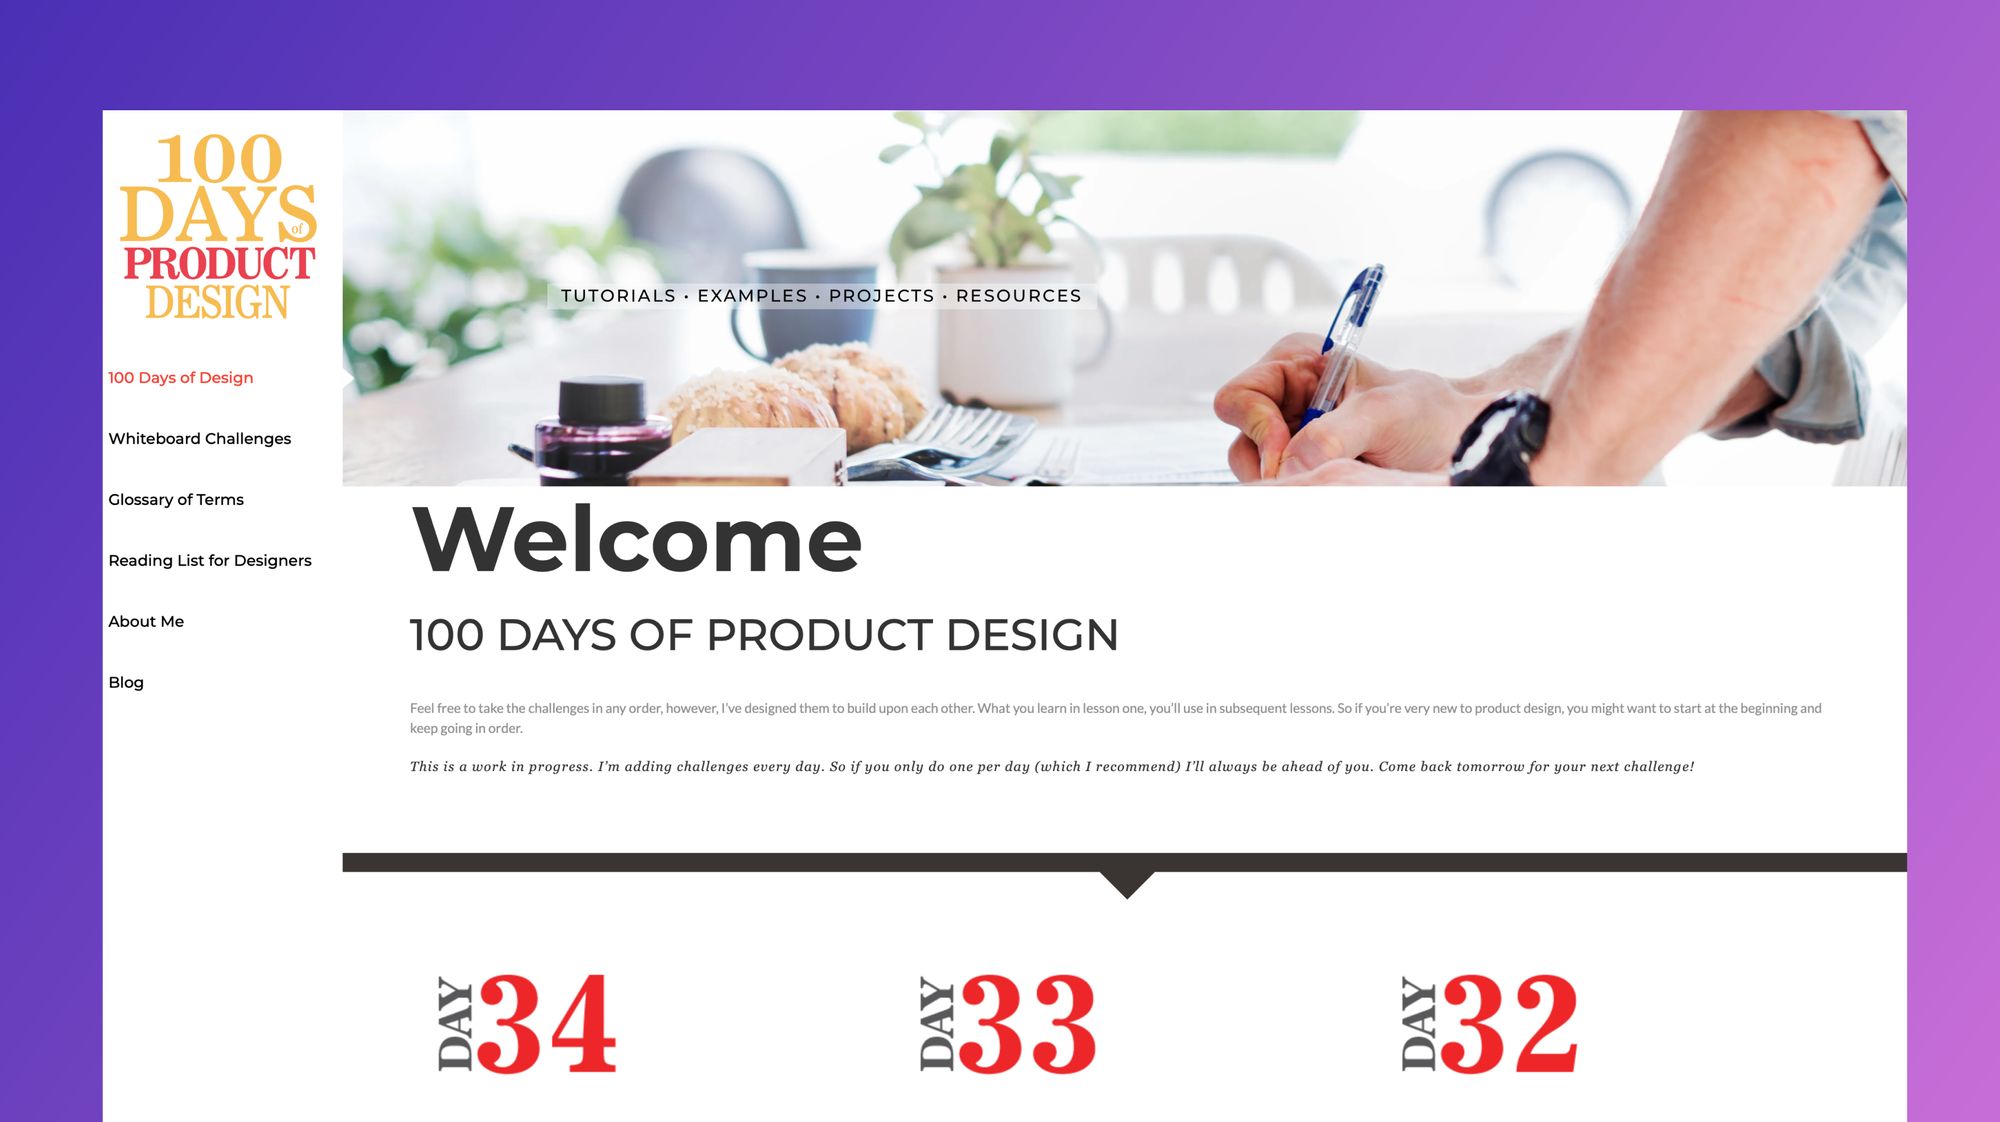 100 days of product design prompts and challenges